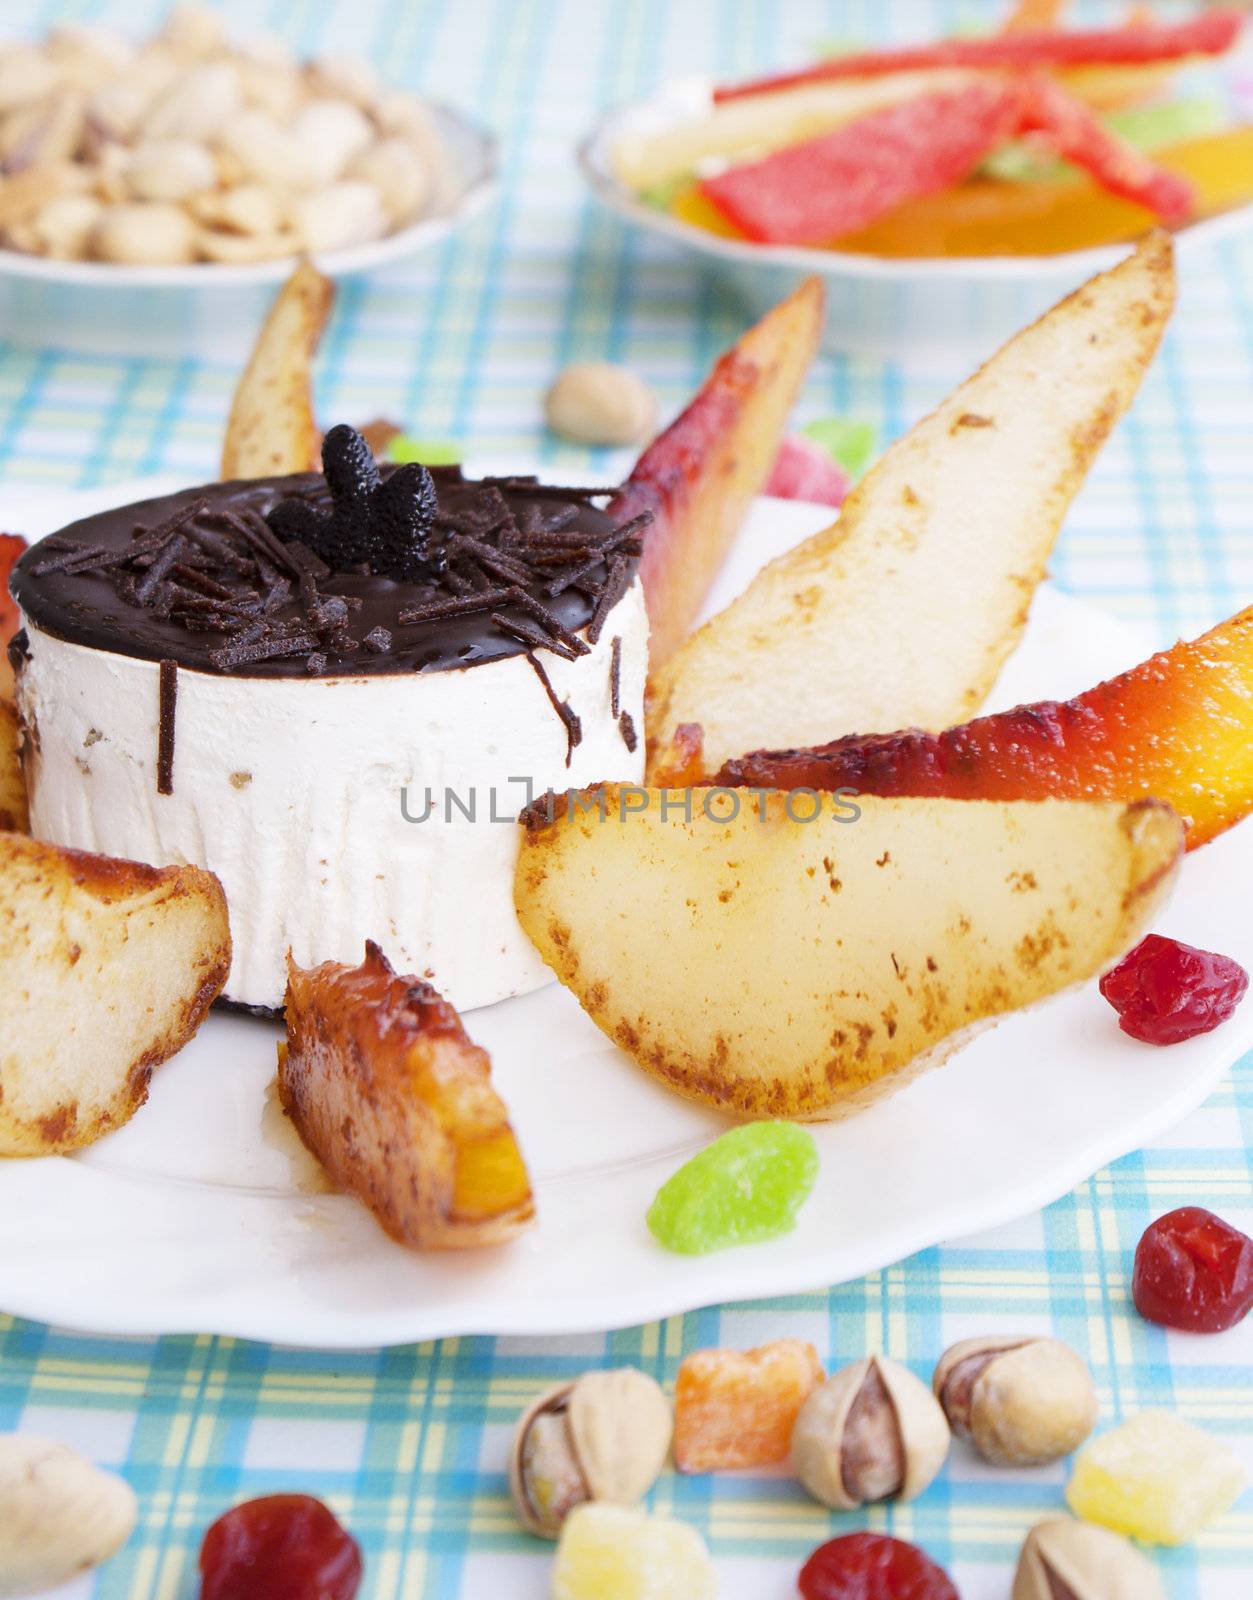 Creative sweet dessert from friut pastry biscuit and baked peach by sergey150770SV